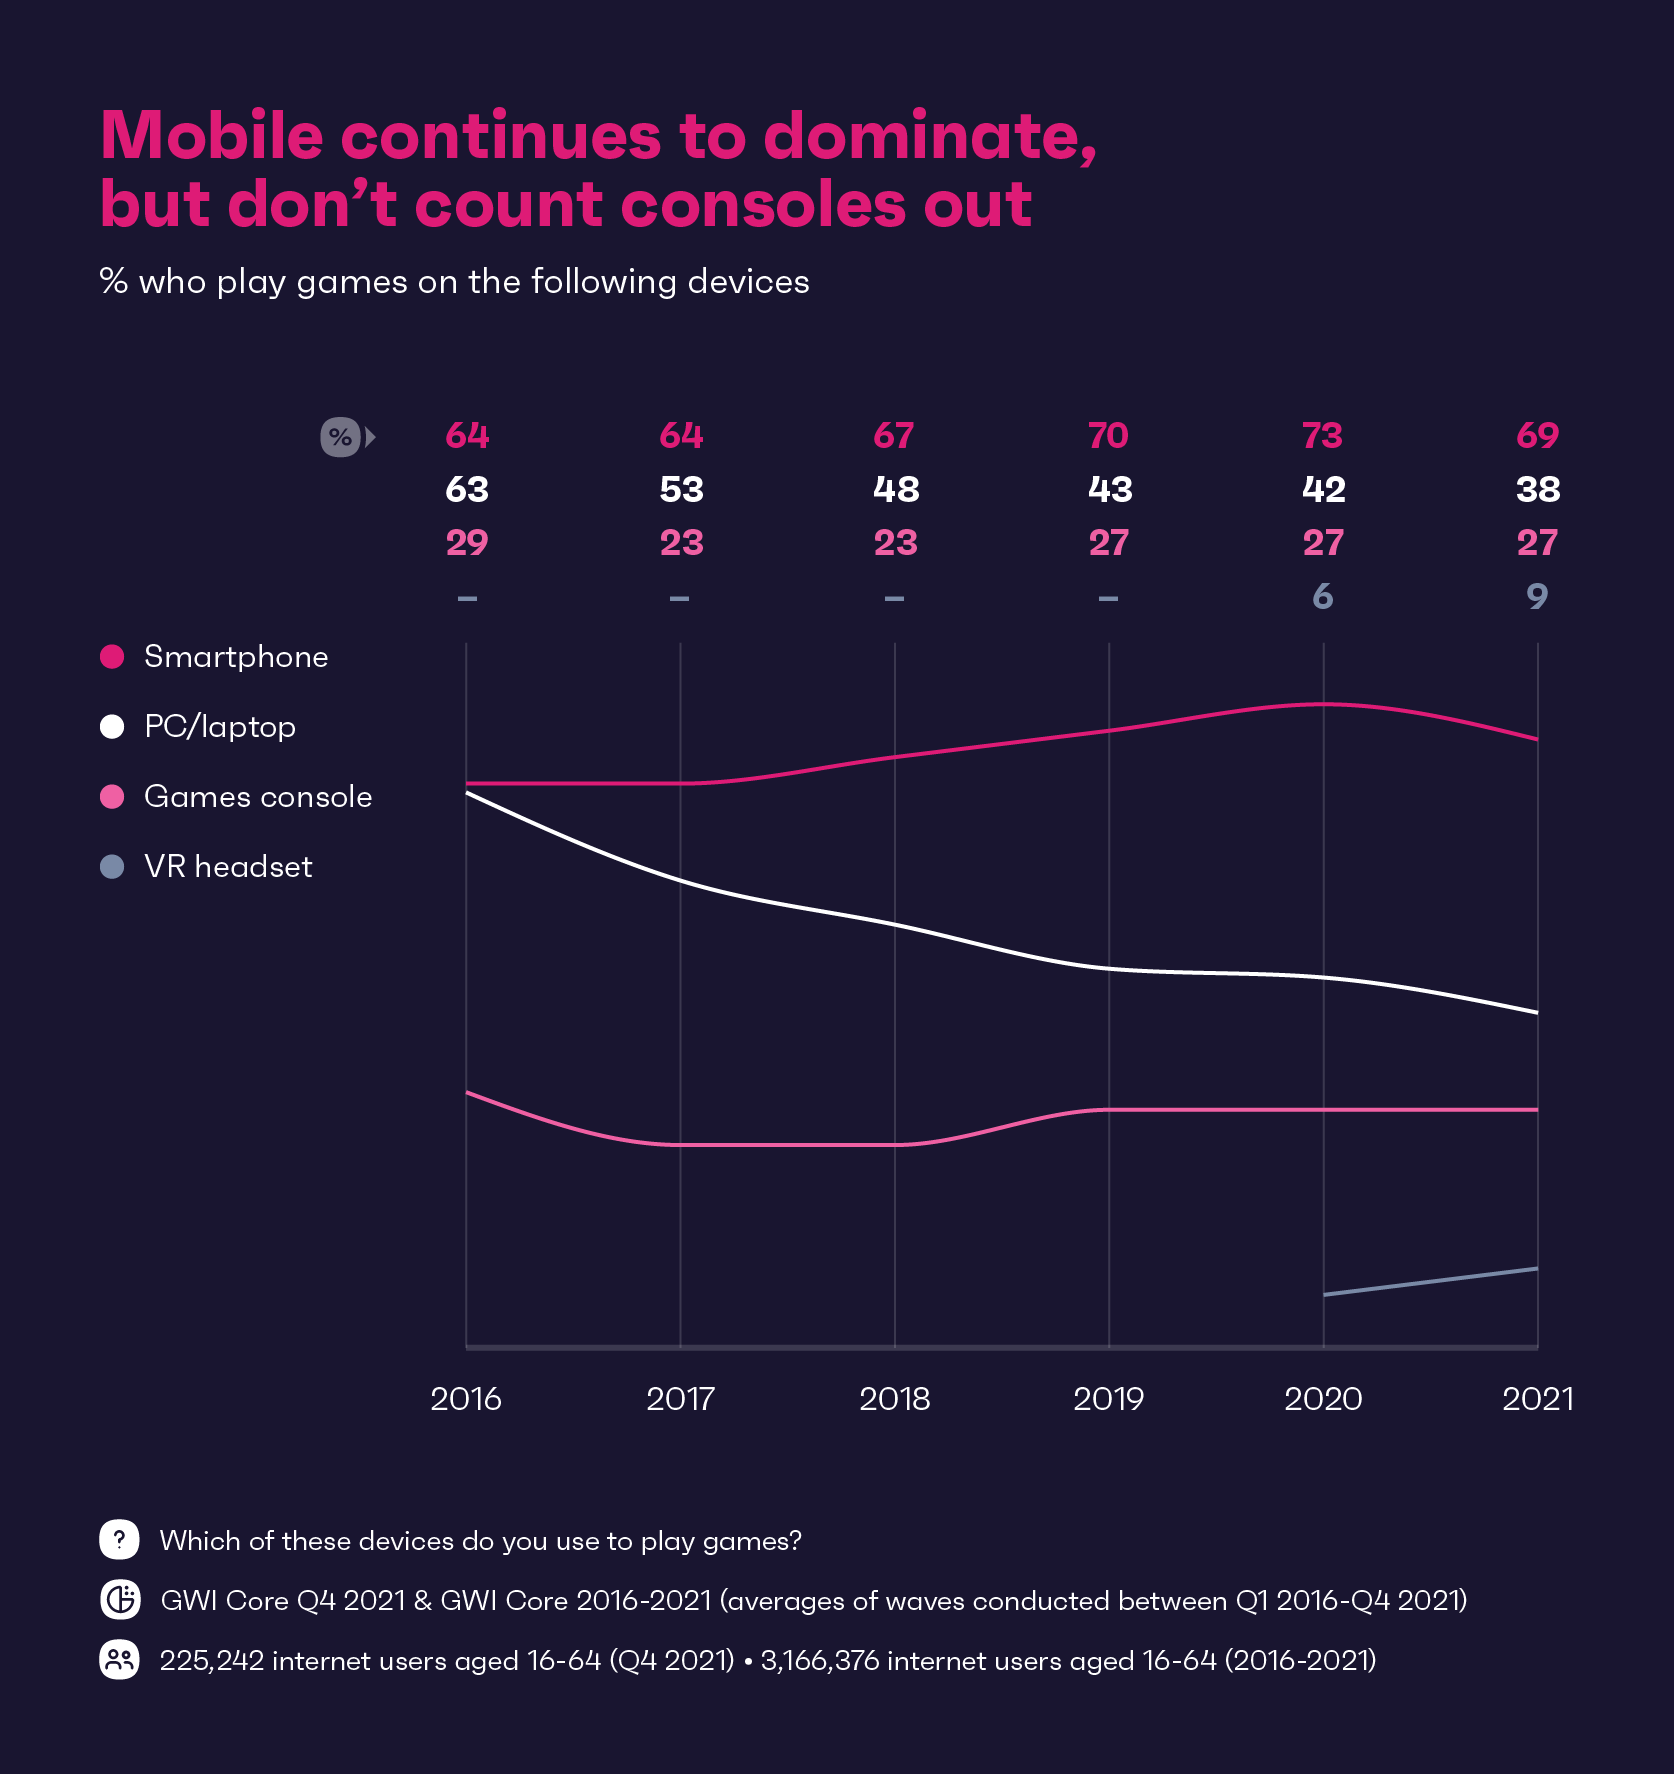 Mobile continues to dominate, but don't count consoles out